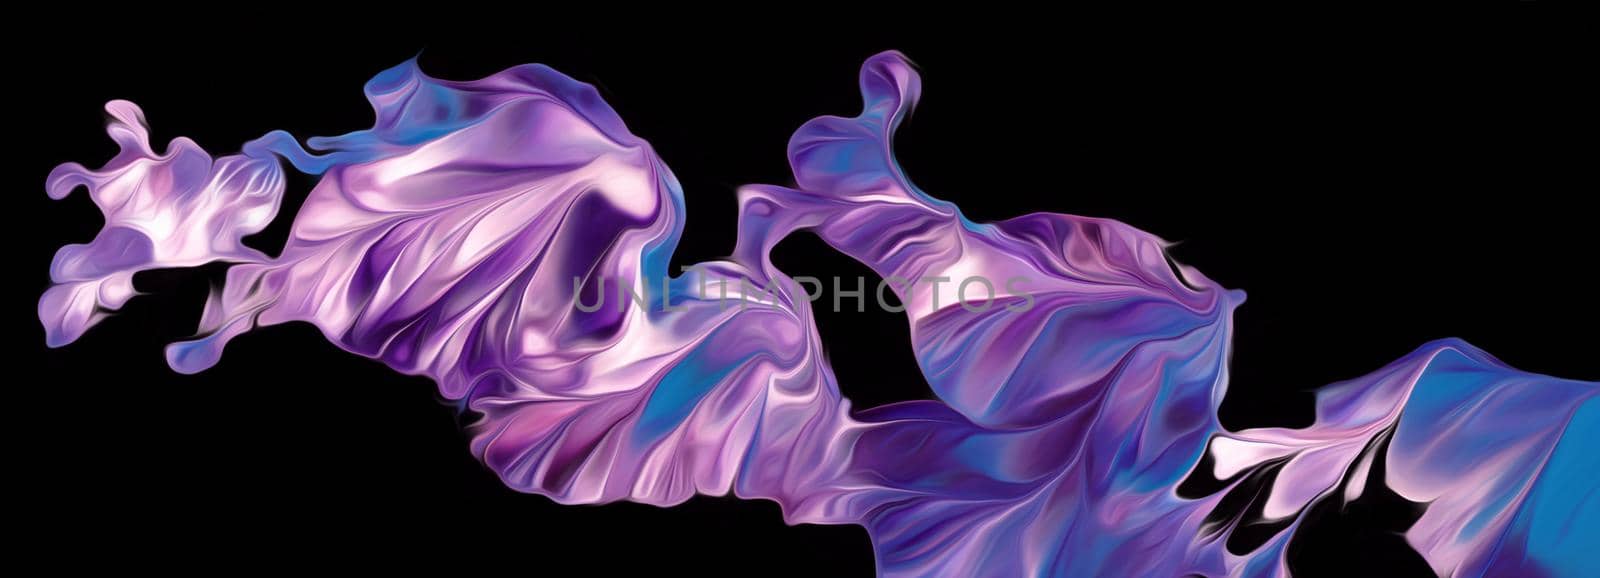 Modern colorful flow marble background illustration by Whatawin